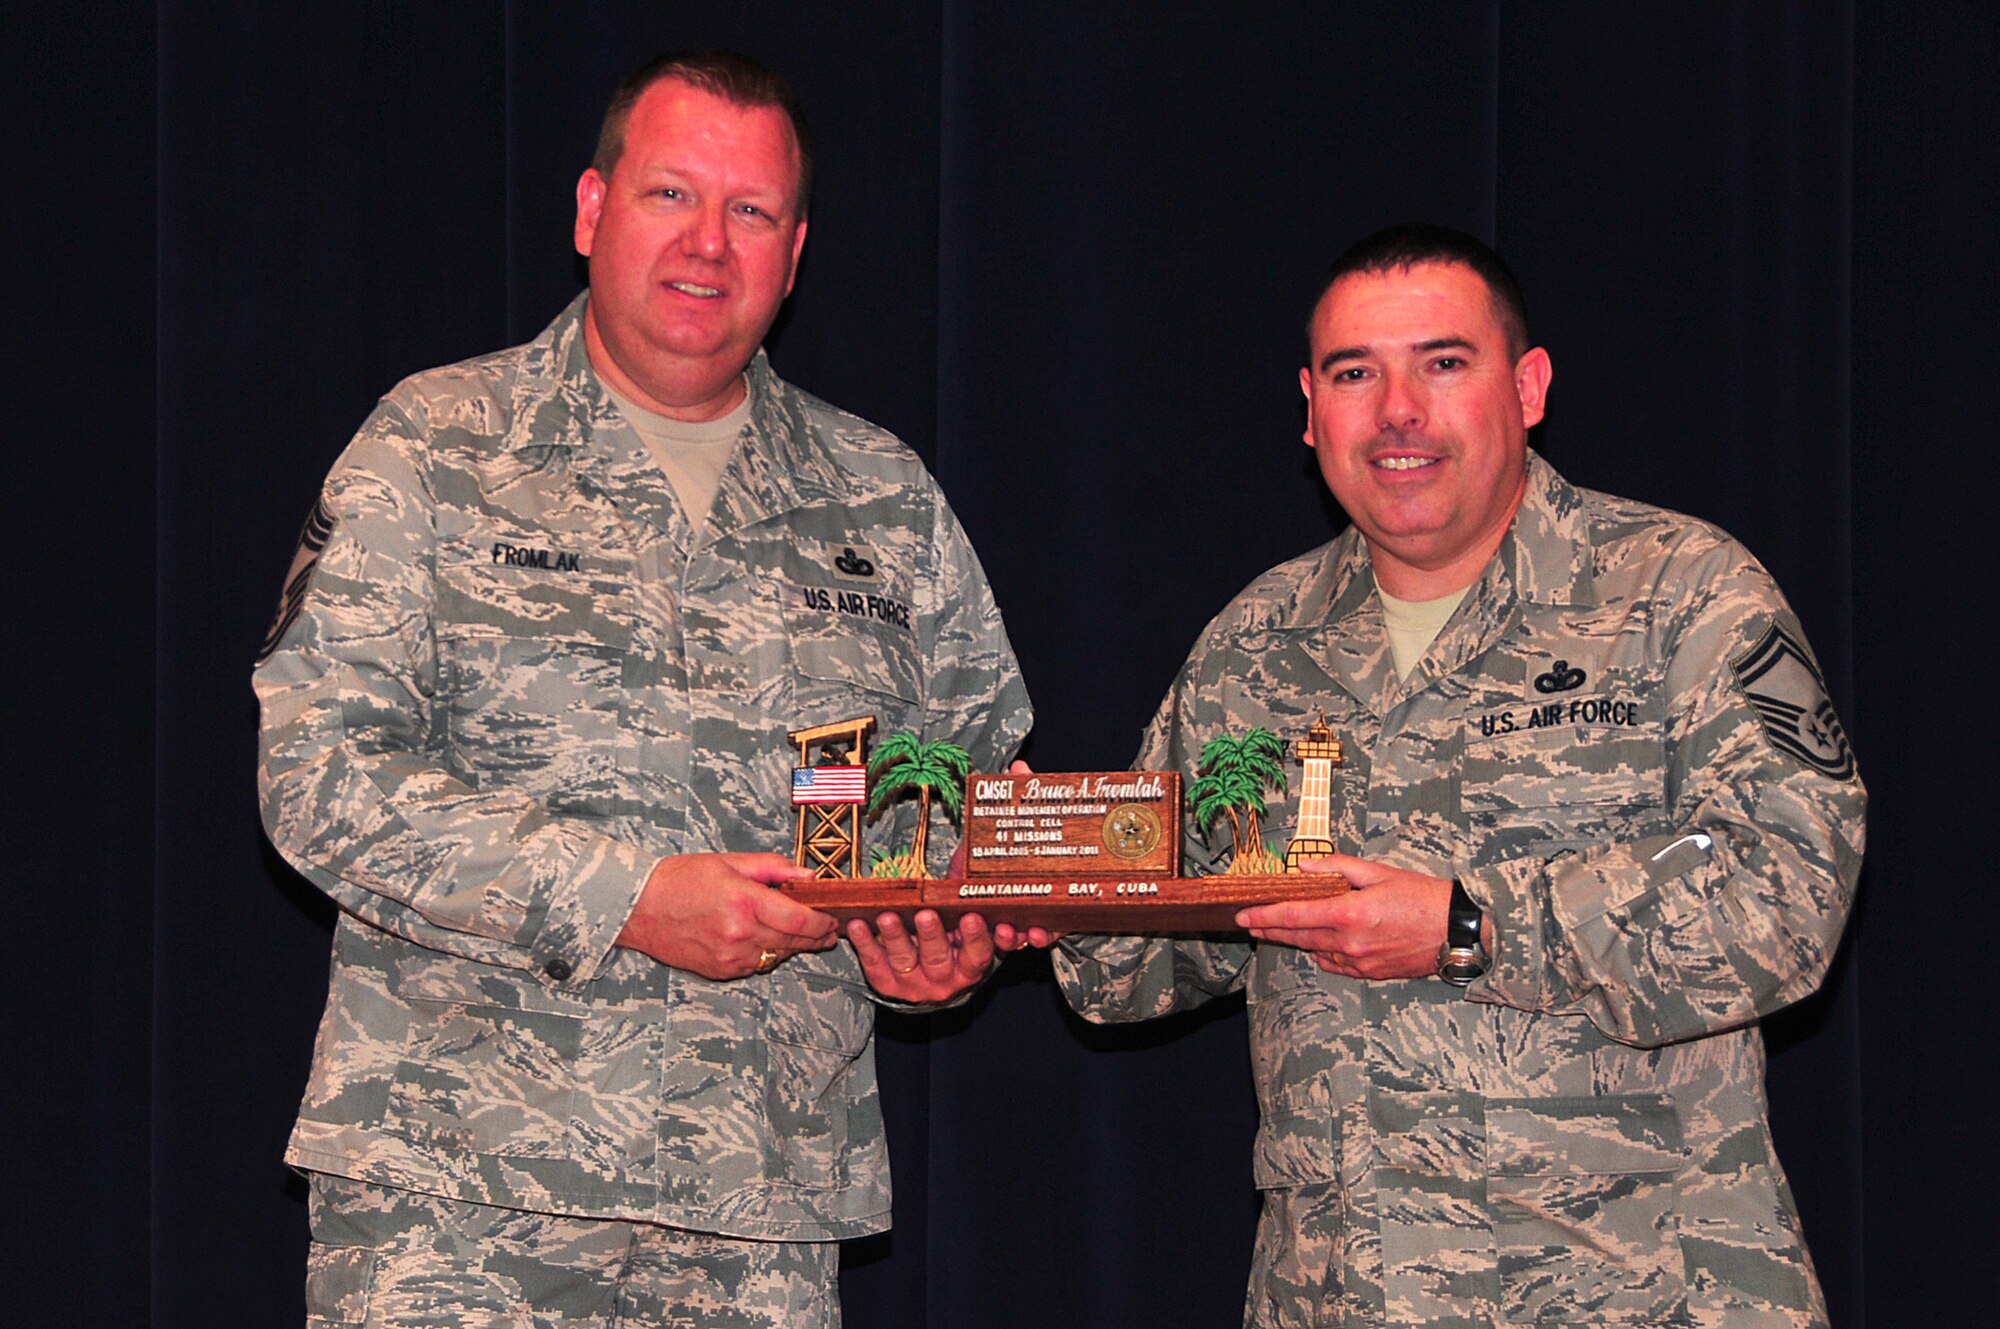 The 171st celebrates the career of Chief Master Sgt. Bruce Fromlak, 171st Security Forces Squadron. Fromlak headed the Control Cell for Detainee Missions Operations from Aril 2005 to January 2011. (National Guard photo by Master Sgt.Stacey Barkey/ Released)